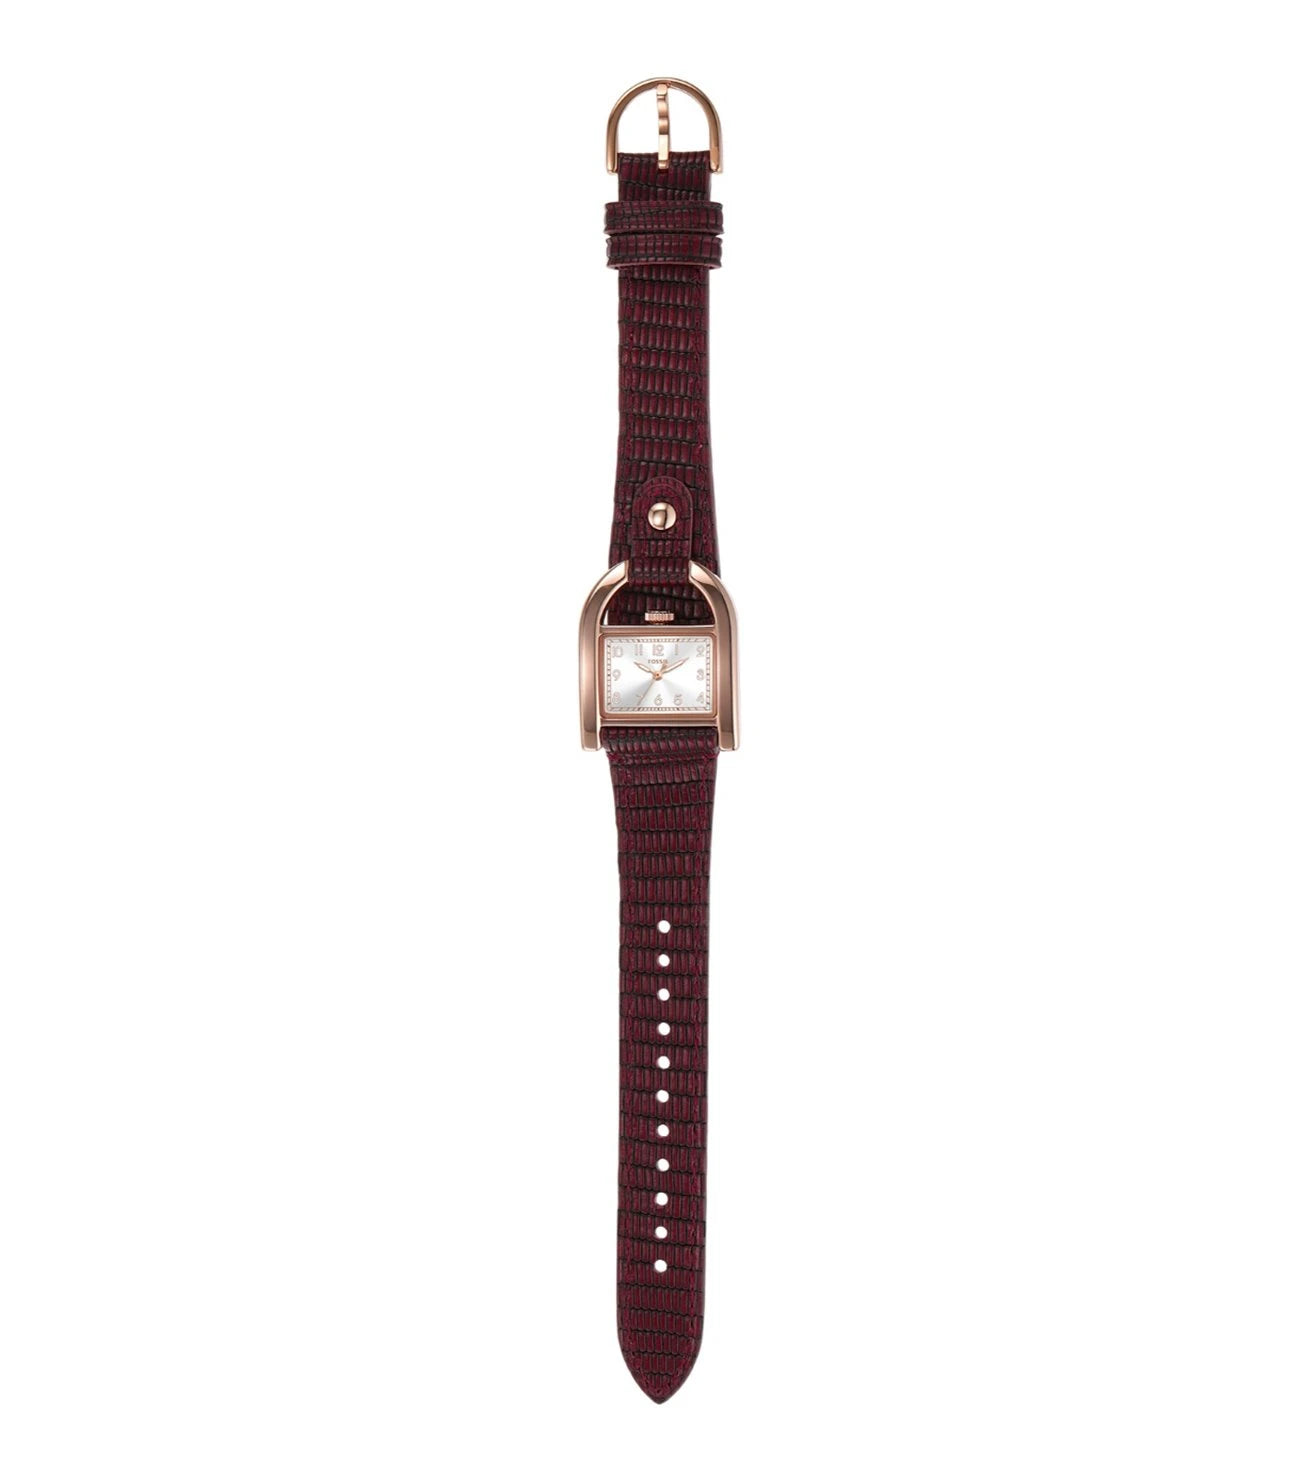 ES5301 | FOSSIL Harwell Analog Watch for Women